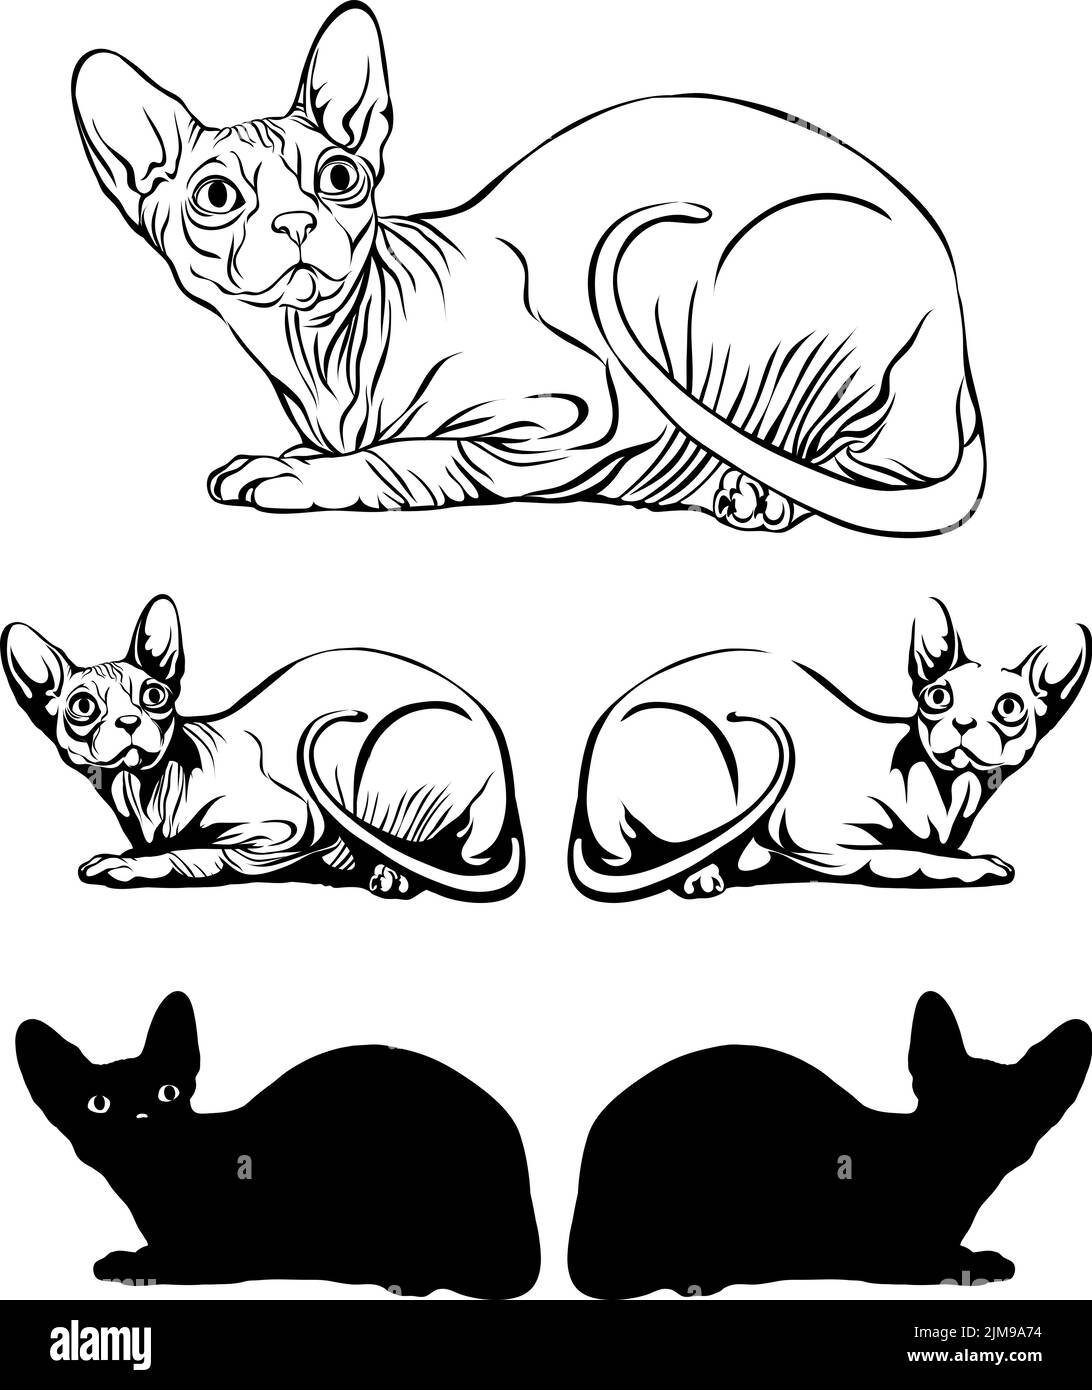 image of a cat, picture of  lying sphinx cat, illustration, set, white, black, isolated, simple, icon, art, symbol, graphic, drawing Stock Vector